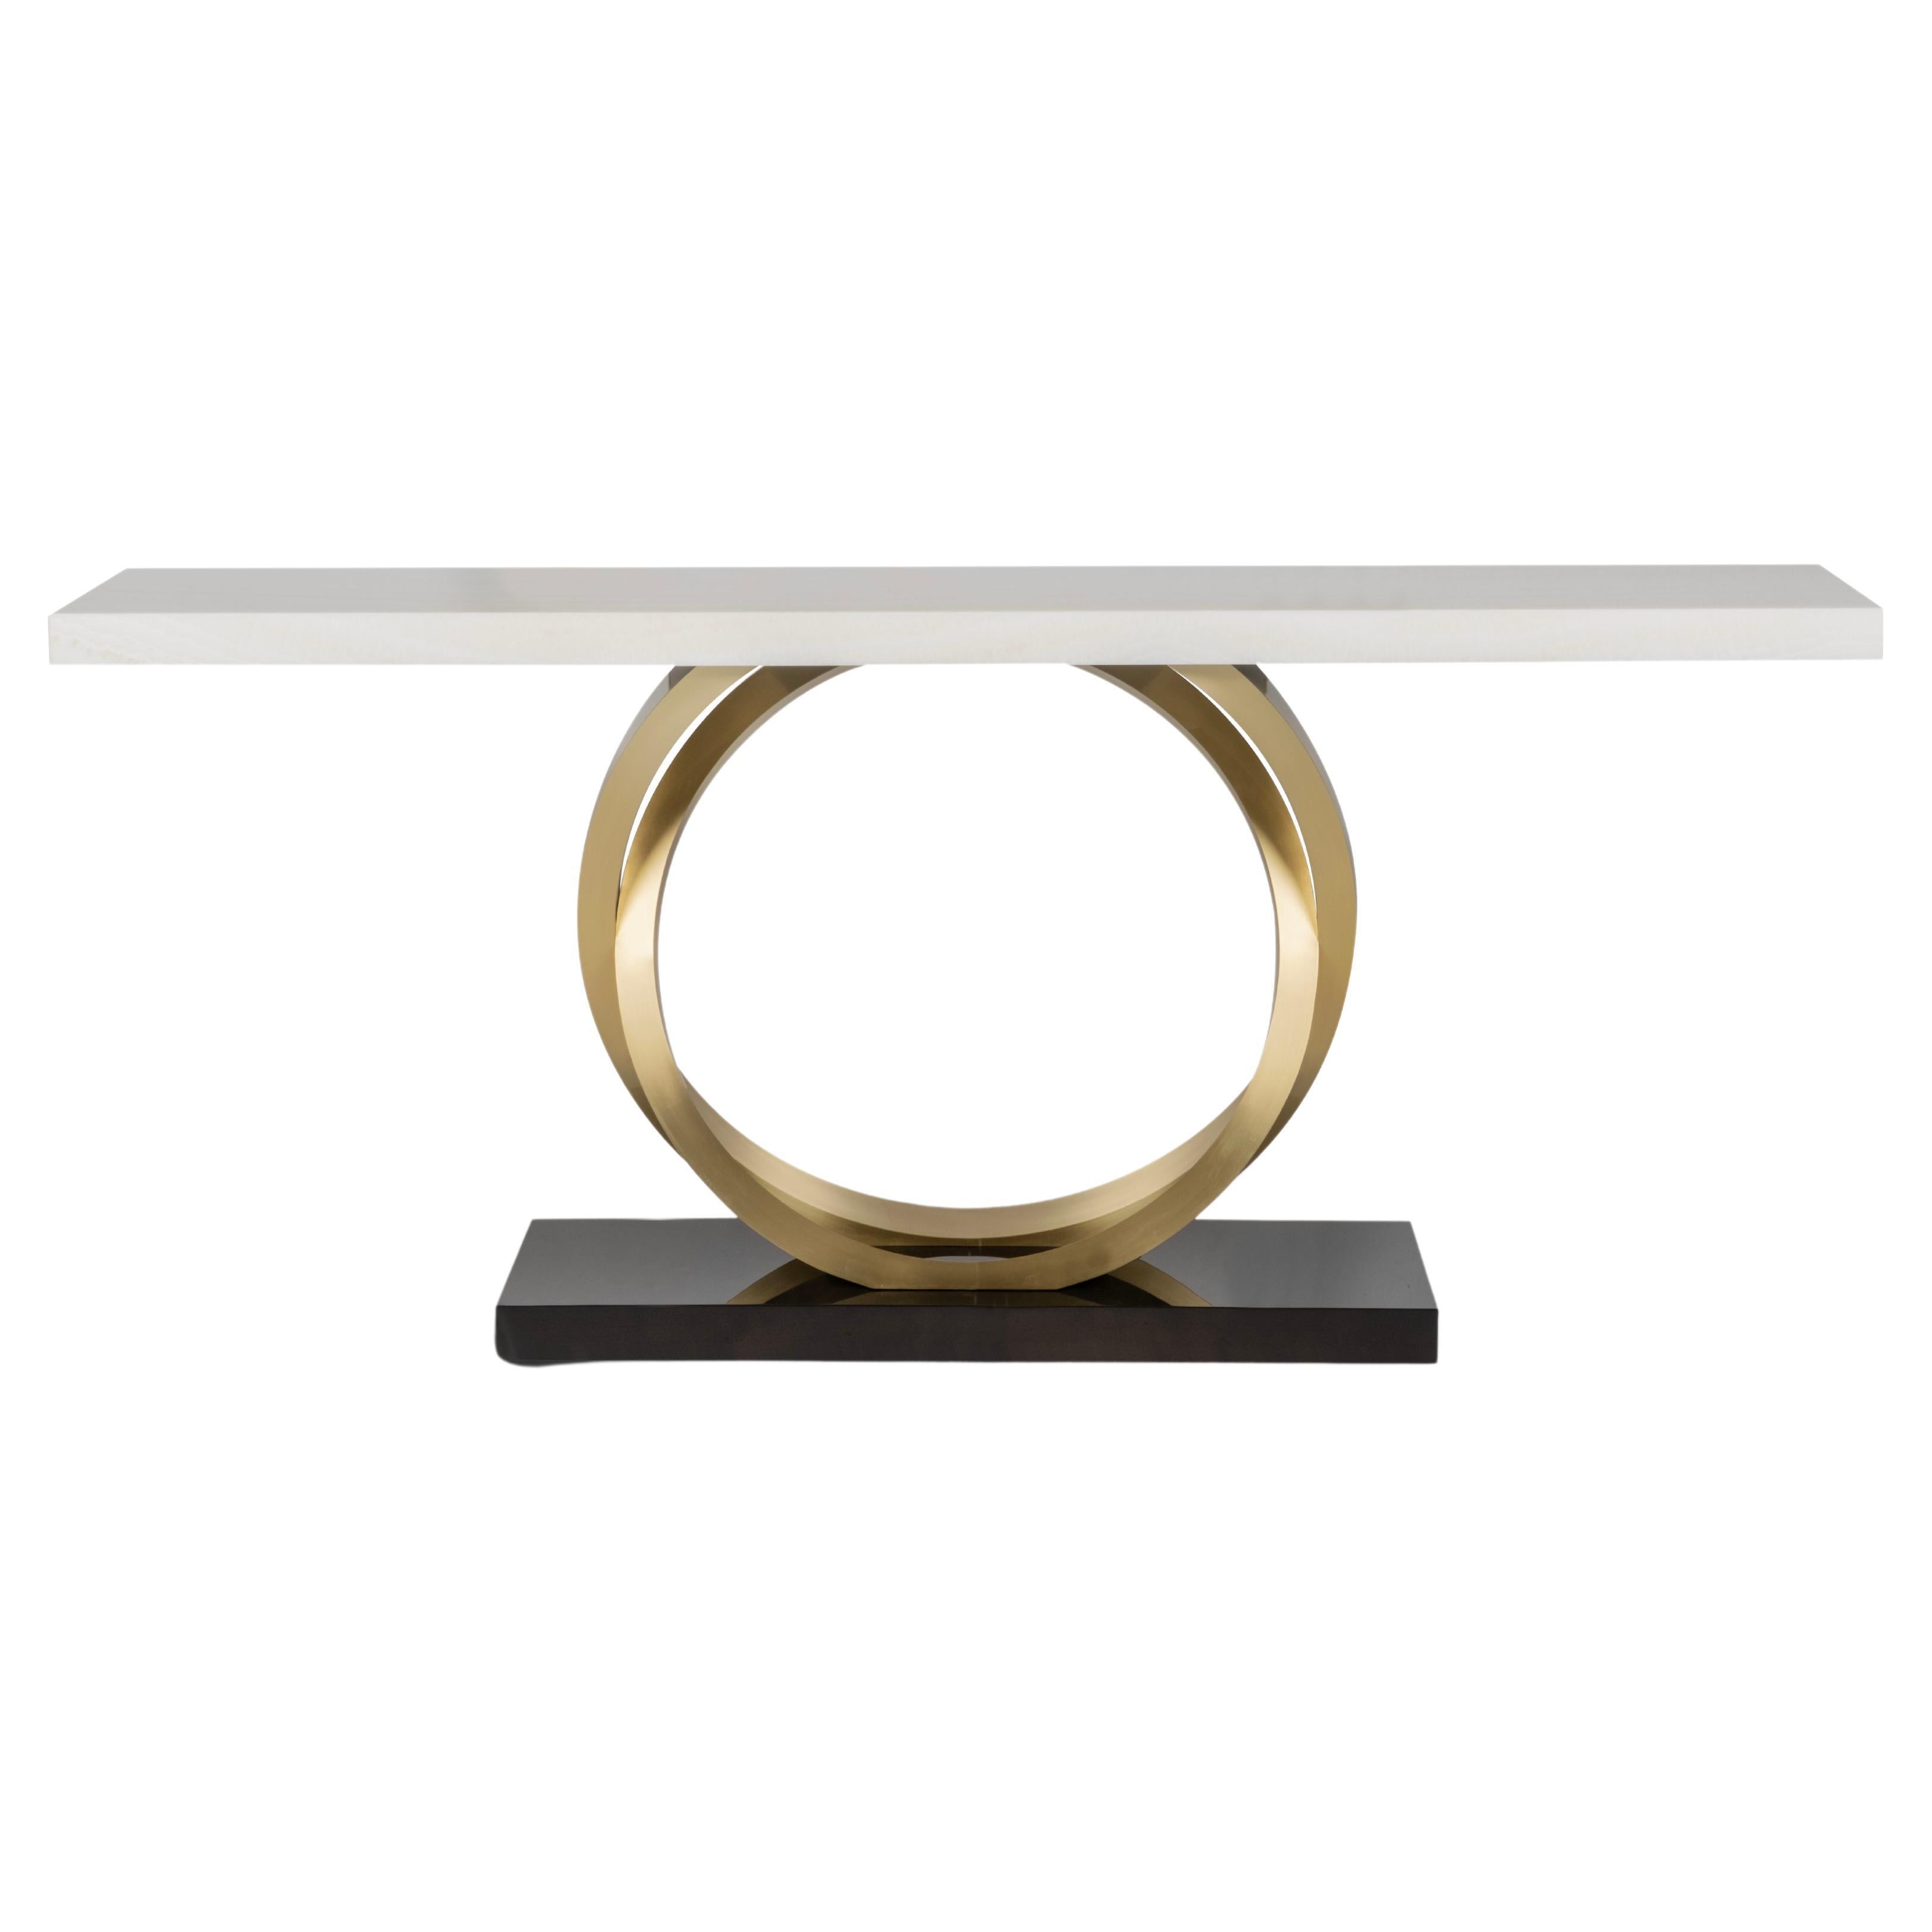 Art Deco Turim Console Table Onyx Brass Handmade in Portugal by Greenapple